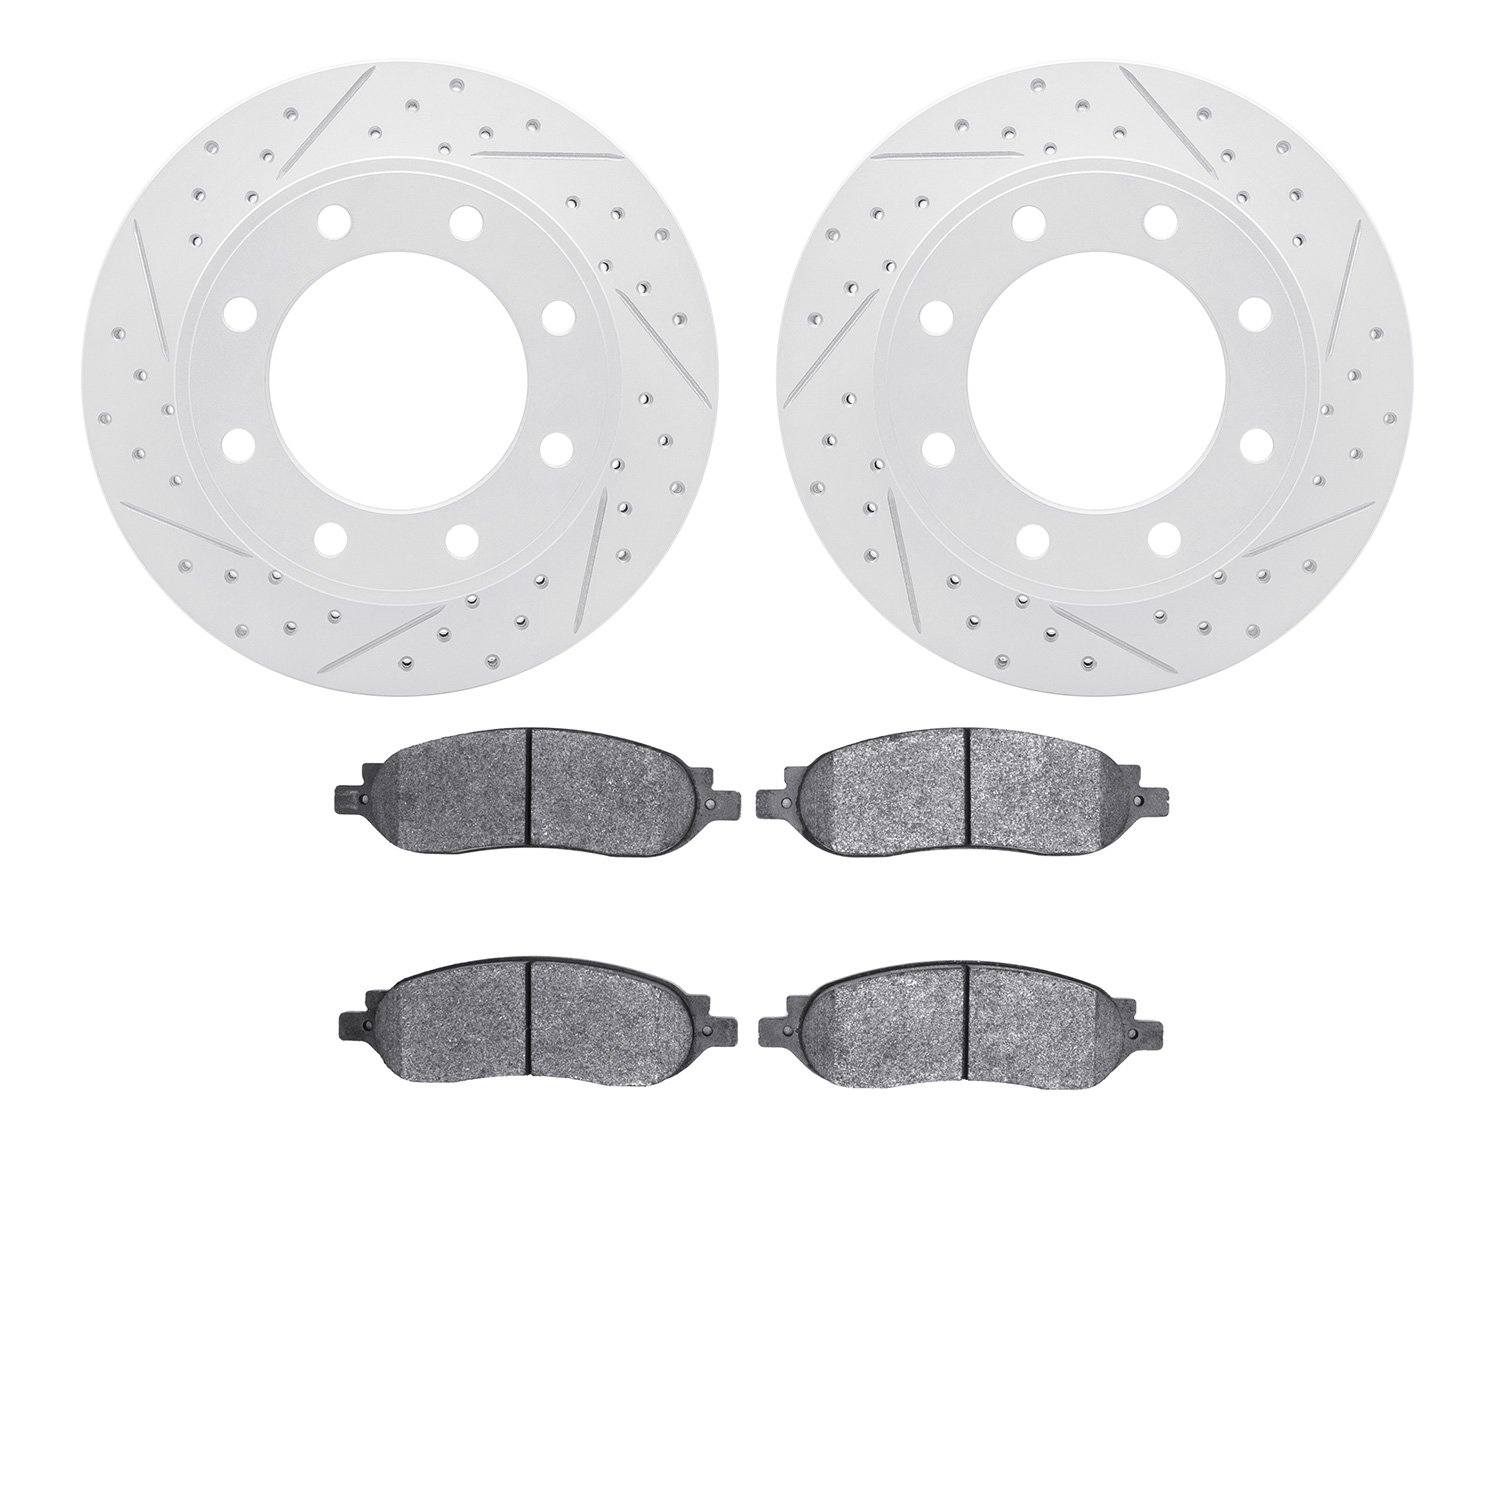 2202-99153 Geoperformance Drilled/Slotted Rotors w/Heavy-Duty Pads Kit, 2005-2007 Ford/Lincoln/Mercury/Mazda, Position: Rear